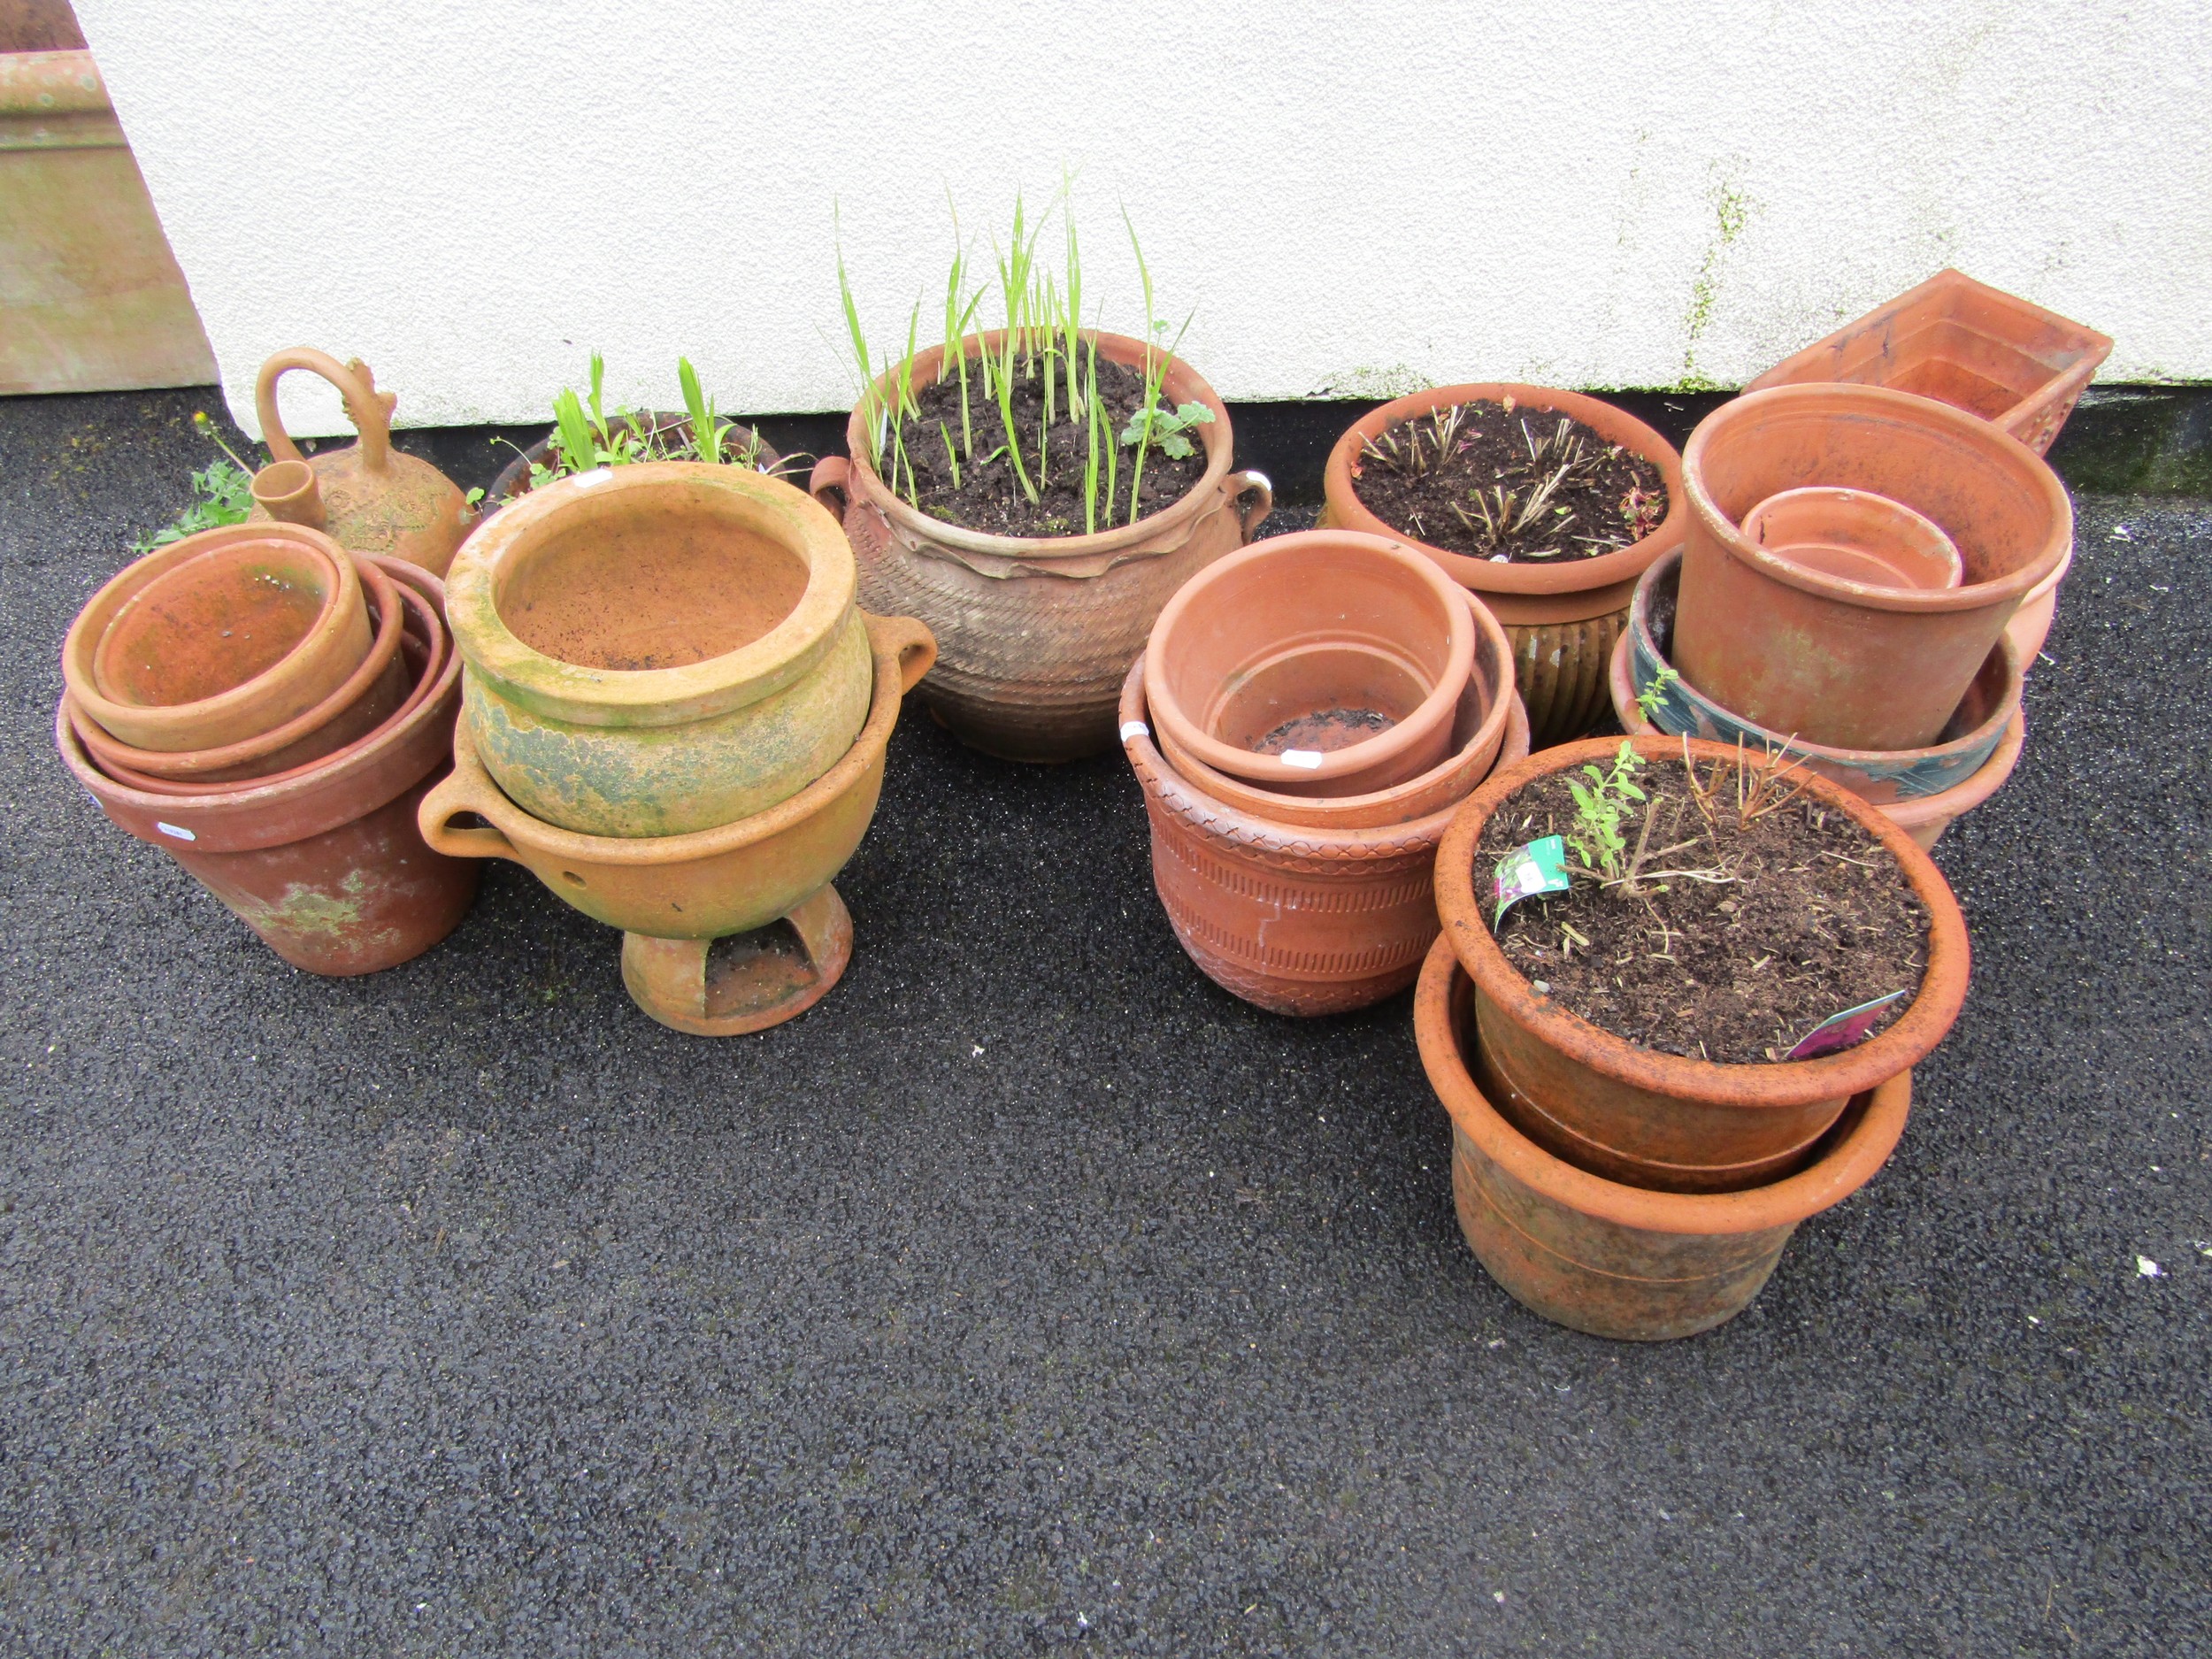 A quantity of weathered terracotta flower pots and planters of varying size and design including a